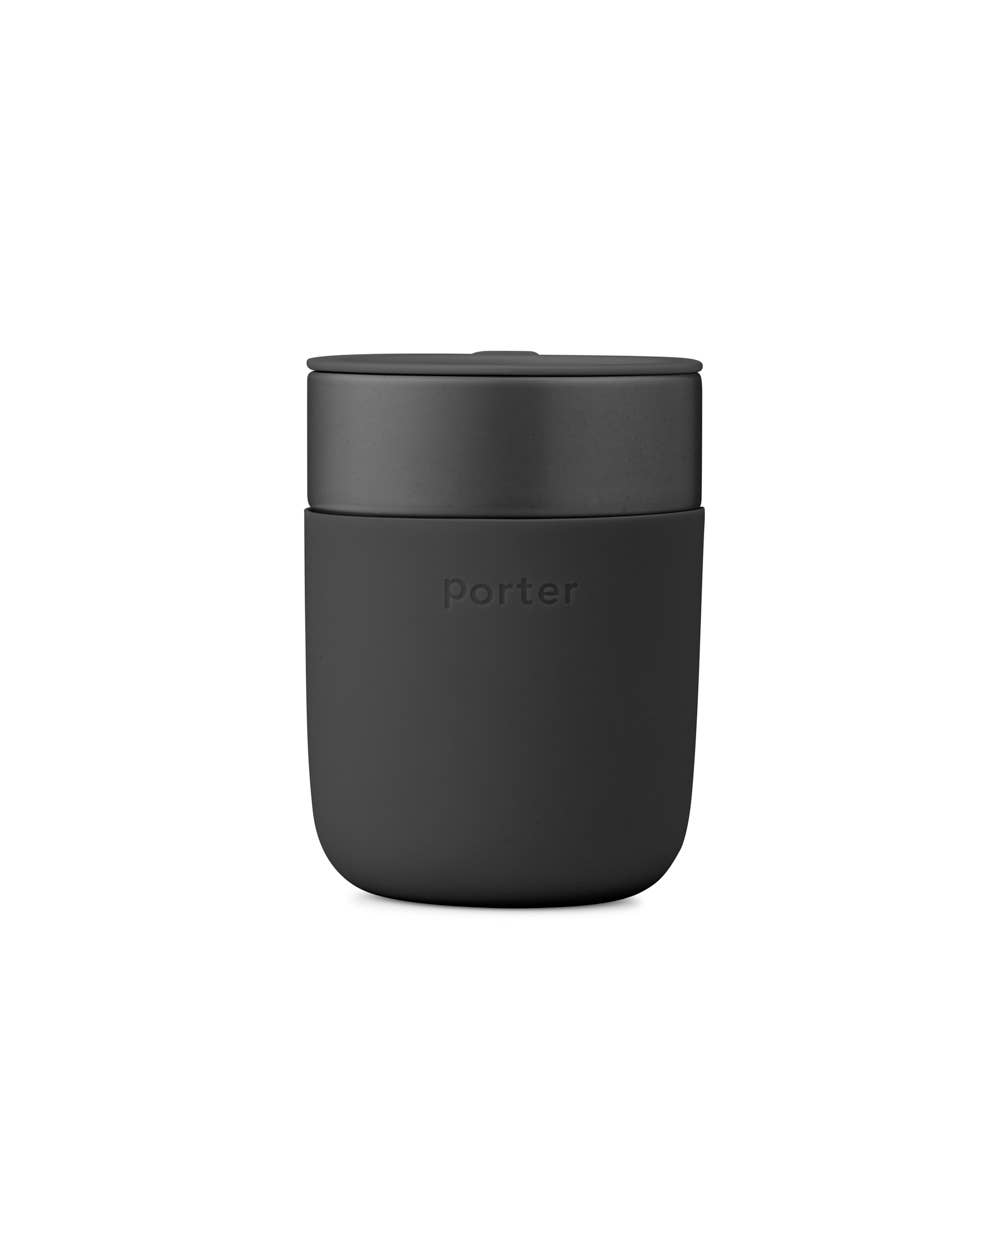 Porter Ceramic Reusable Coffee Mug 12oz  W&P Charcoal  -better made easy-eco-friendly-sustainable-gifting